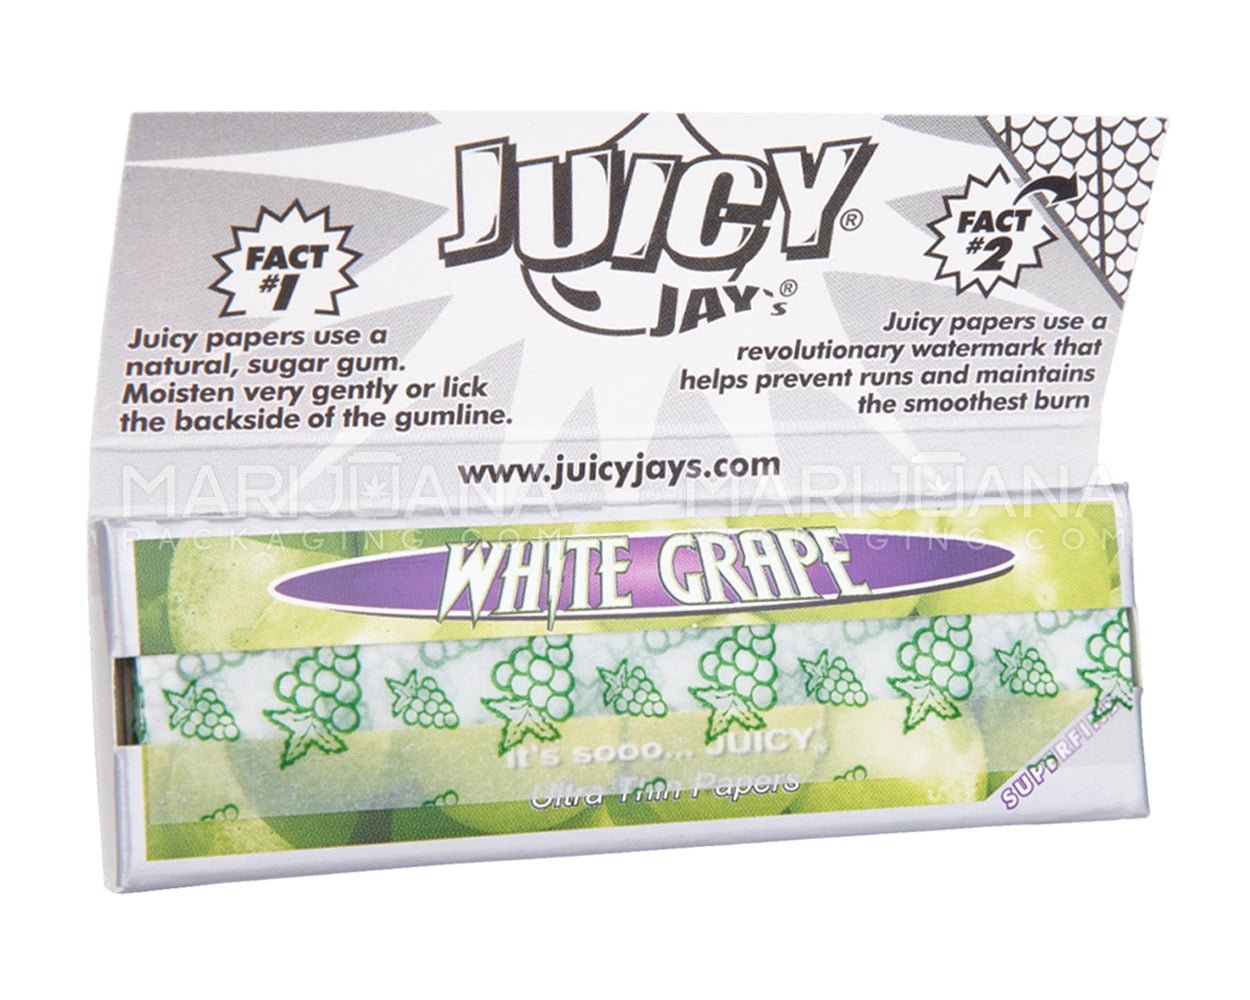 JUICY JAY'S | 'Retail Display' 1 1/4 Size Hemp Rolling Papers | 76mm - White Grape - 24 Count - 4